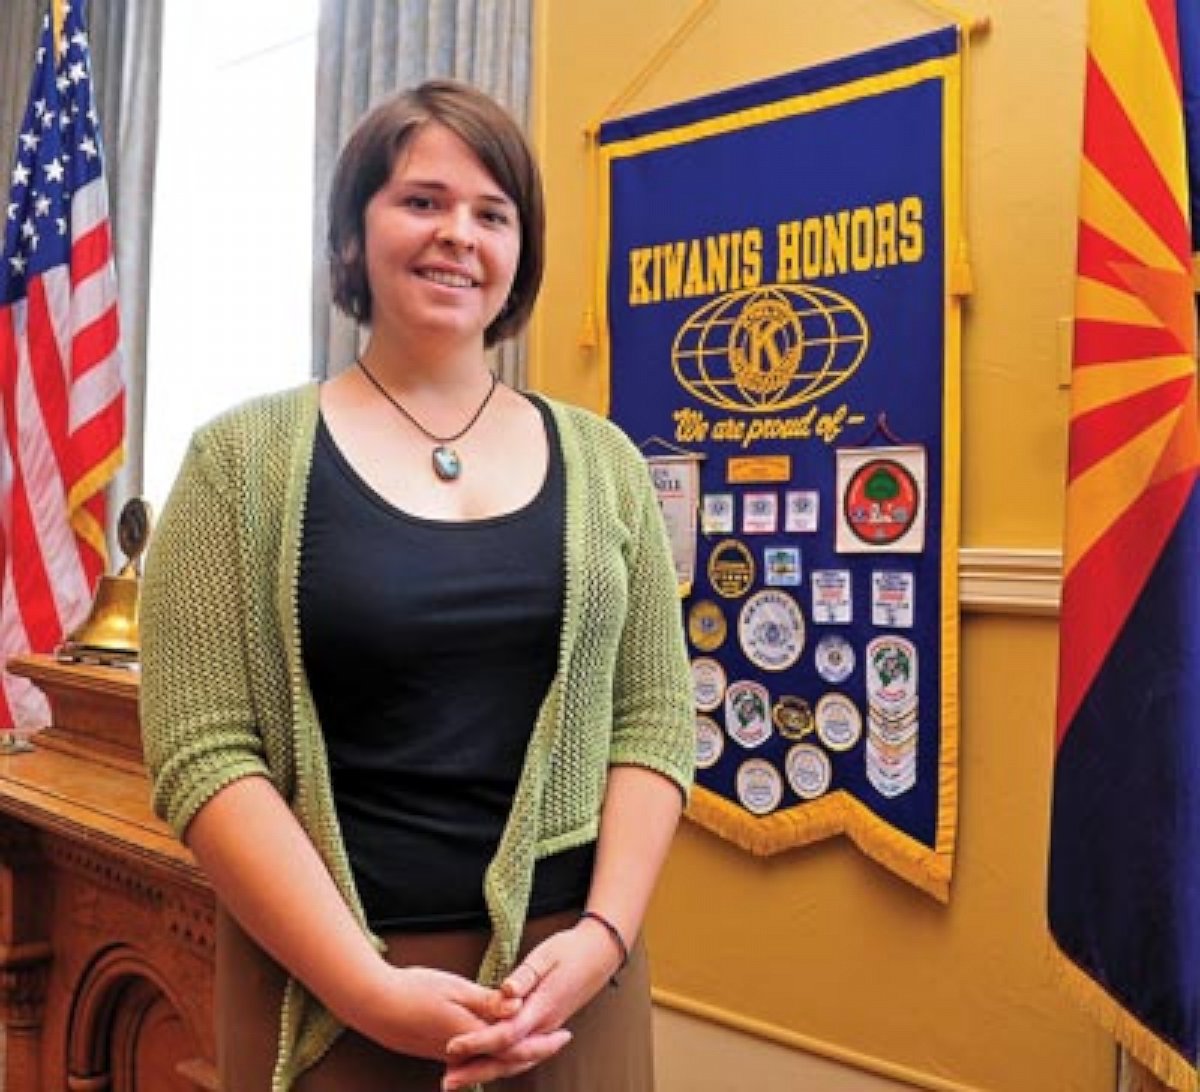 PHOTO: Kayla Mueller, an aid worker, was held by the terror group ISIS.